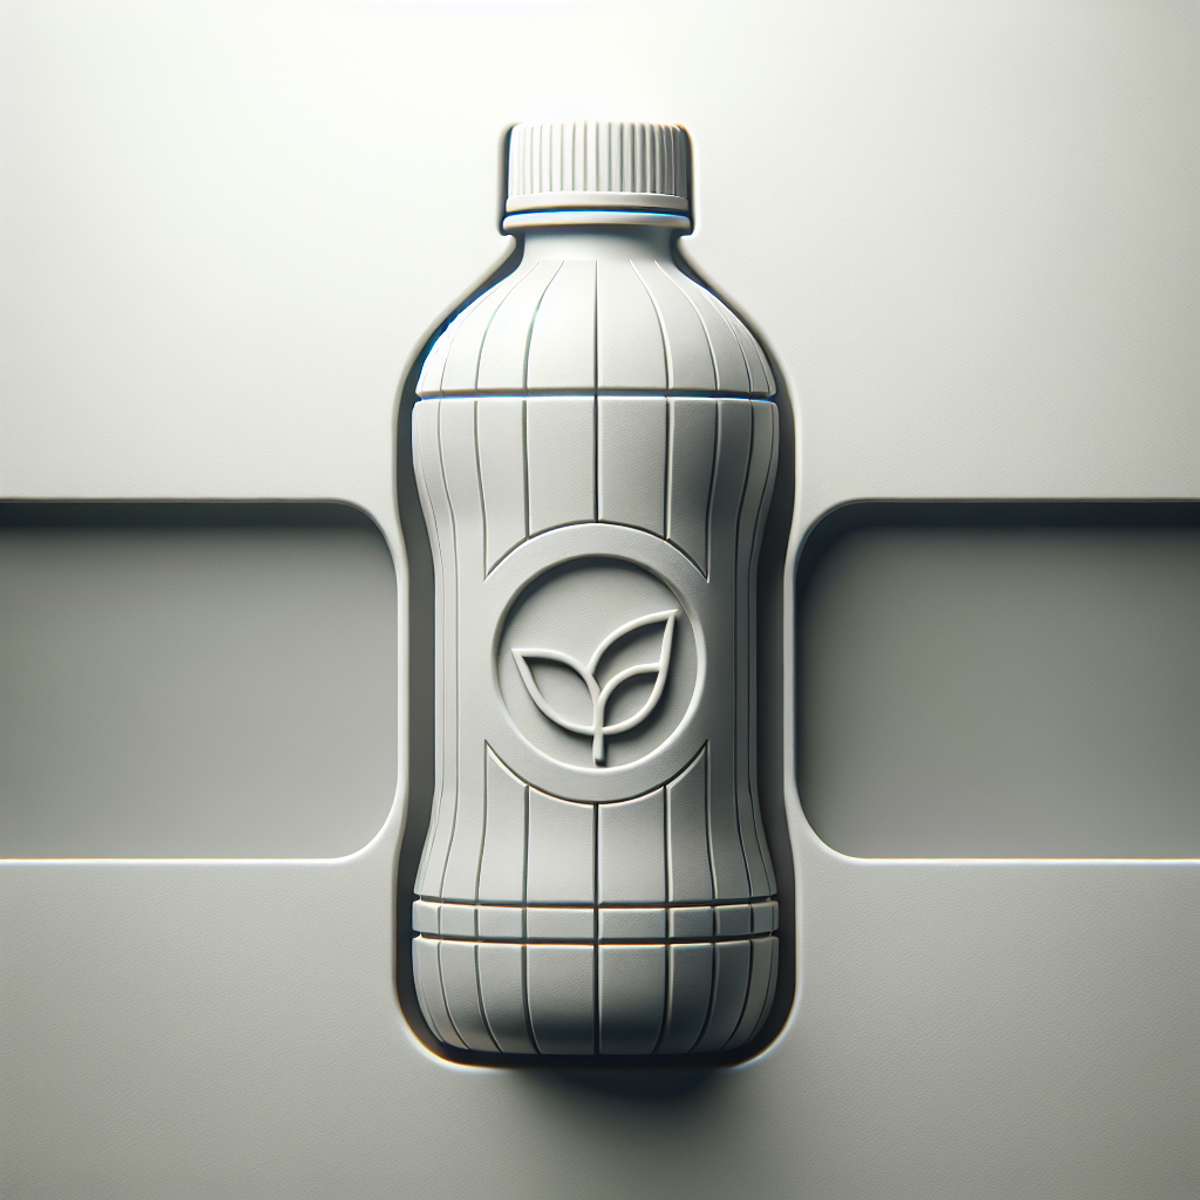 A close-up image of a sleek, durable water bottle made from eco-friendly materials, conveying longevity and environmental sustainability.